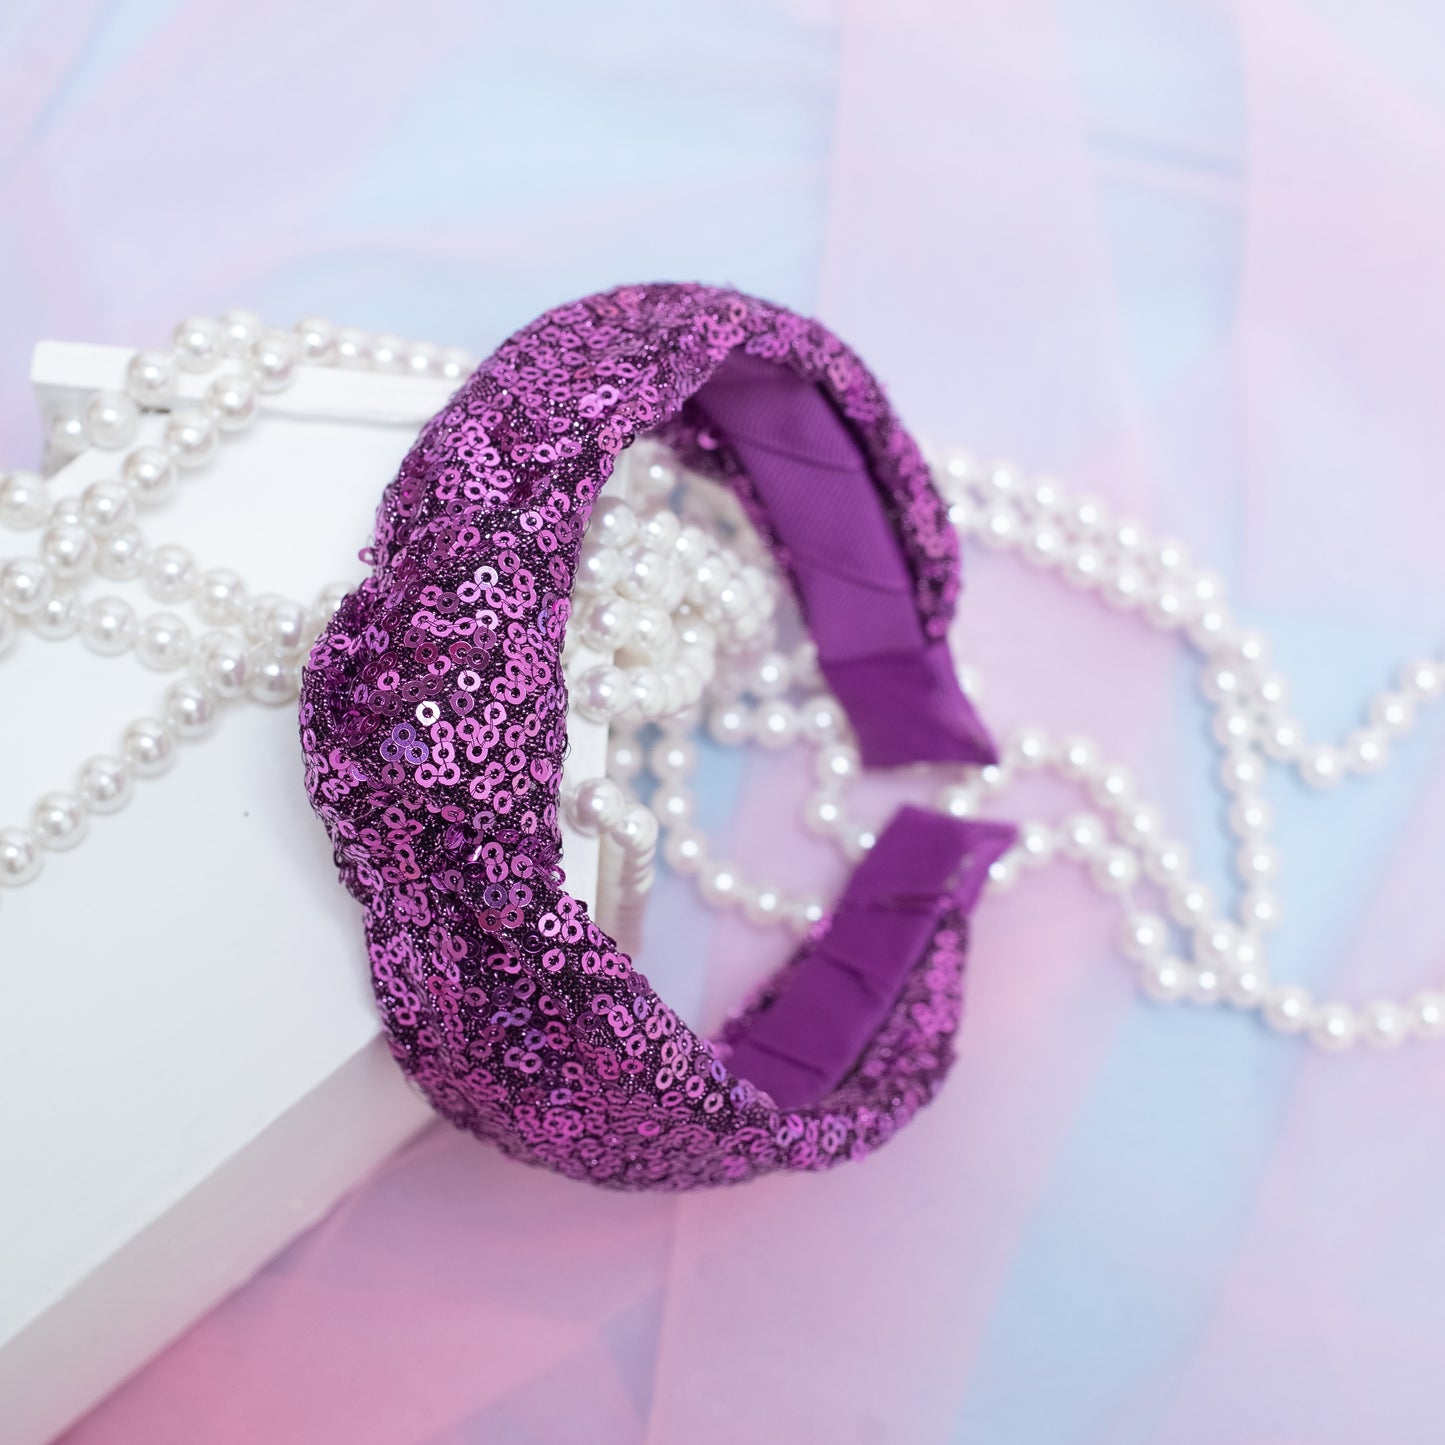 Party knotted hair band with sequins - Magenta (1 single hair band = 1 quantity)